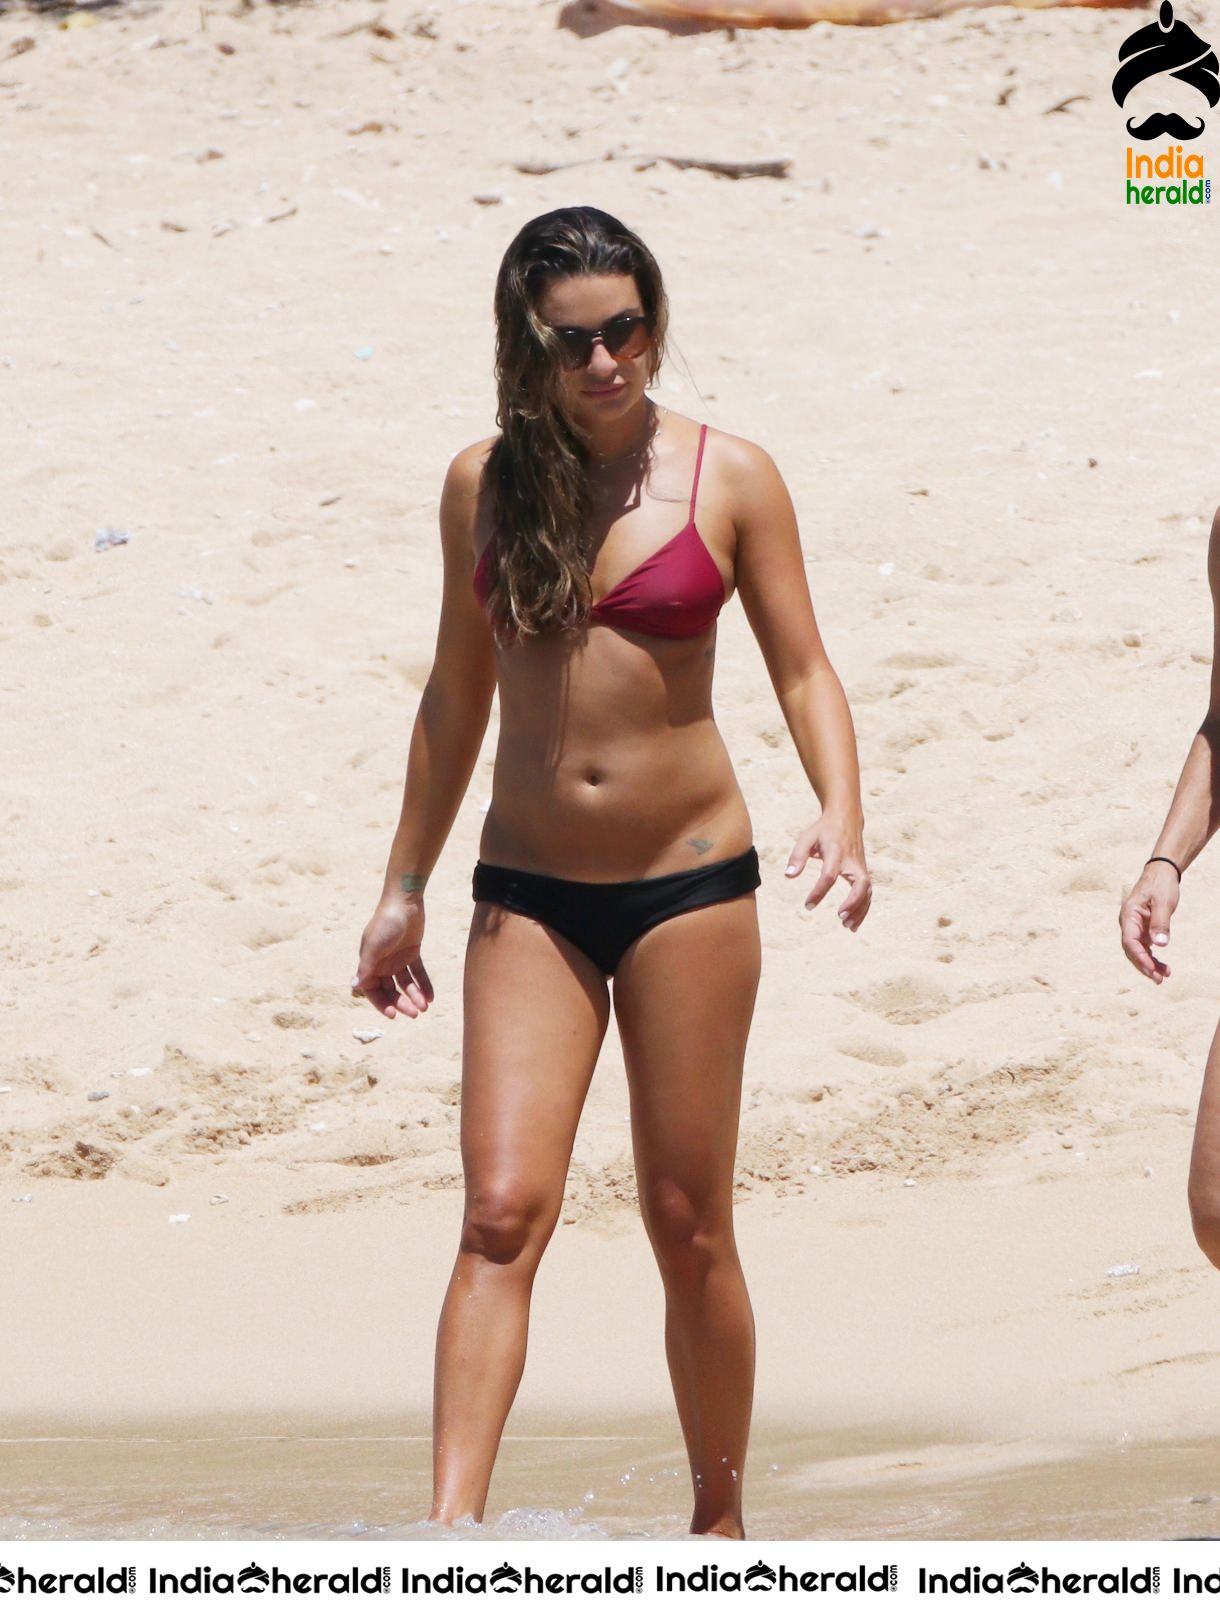 Lea Michele in a Hot Bikini and exposes her Sexy Body by getting Wet